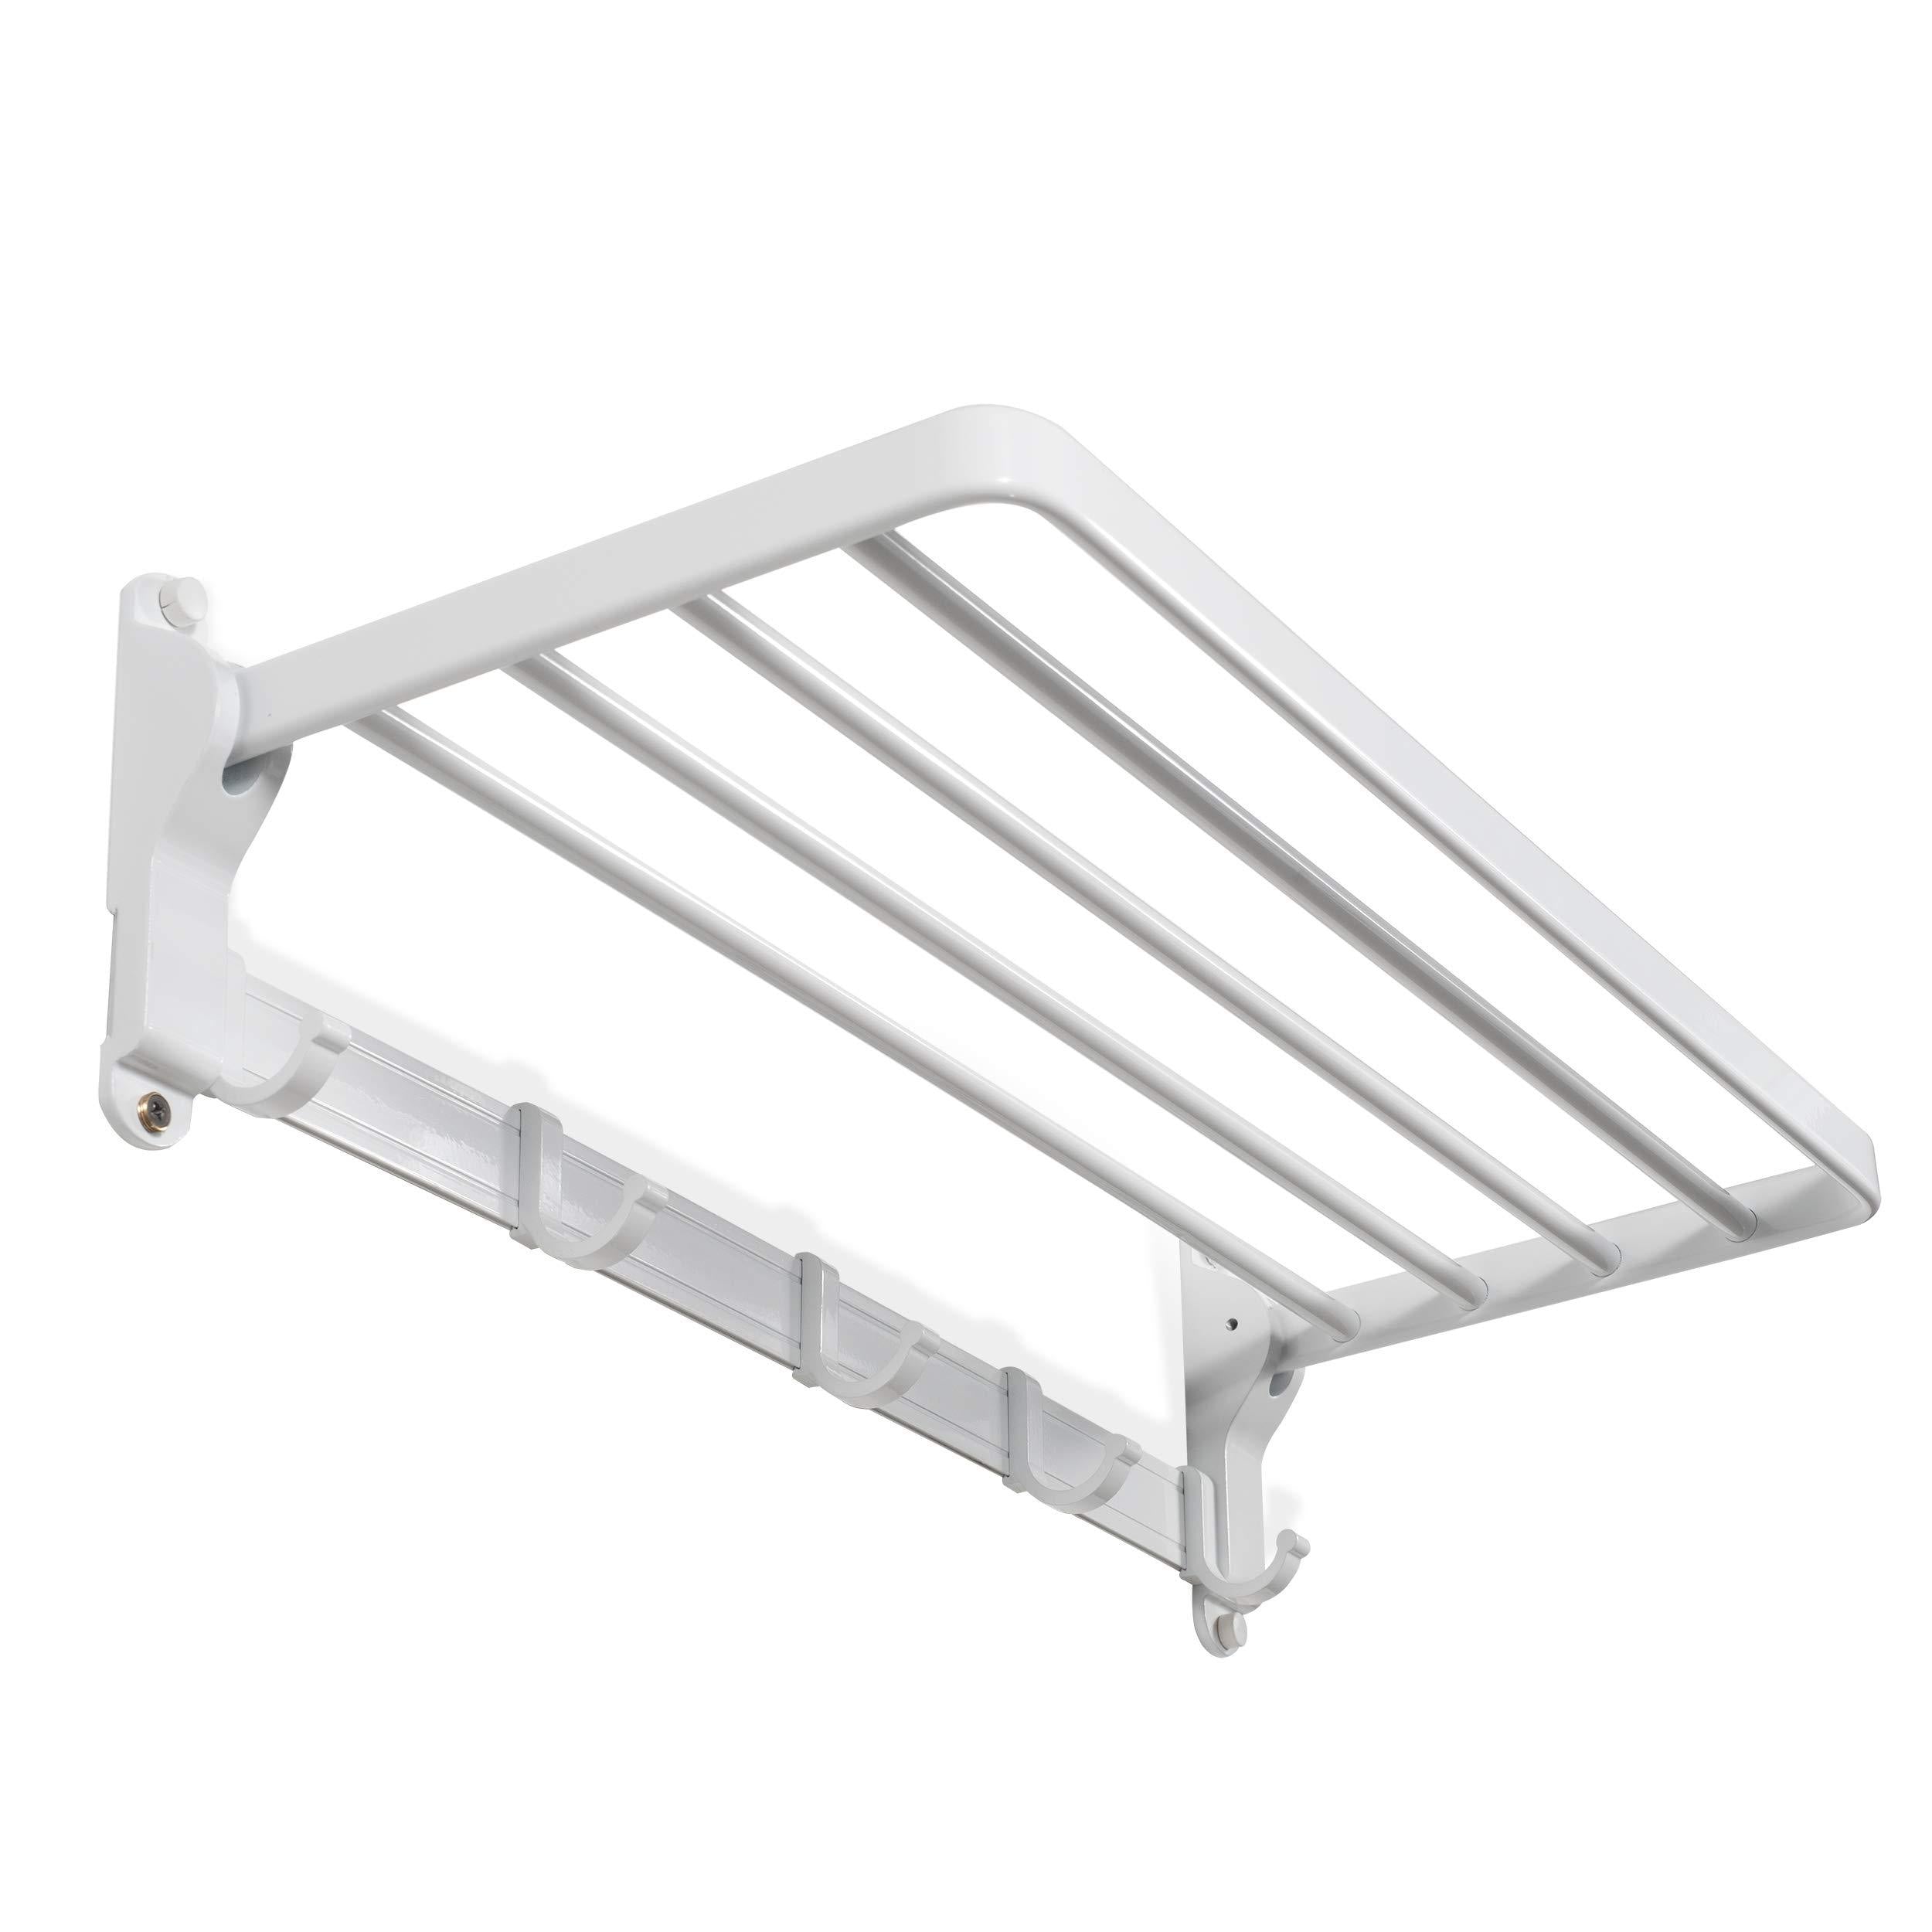 Brightmaison Clothes Drying Rack Wall Mounted Folding